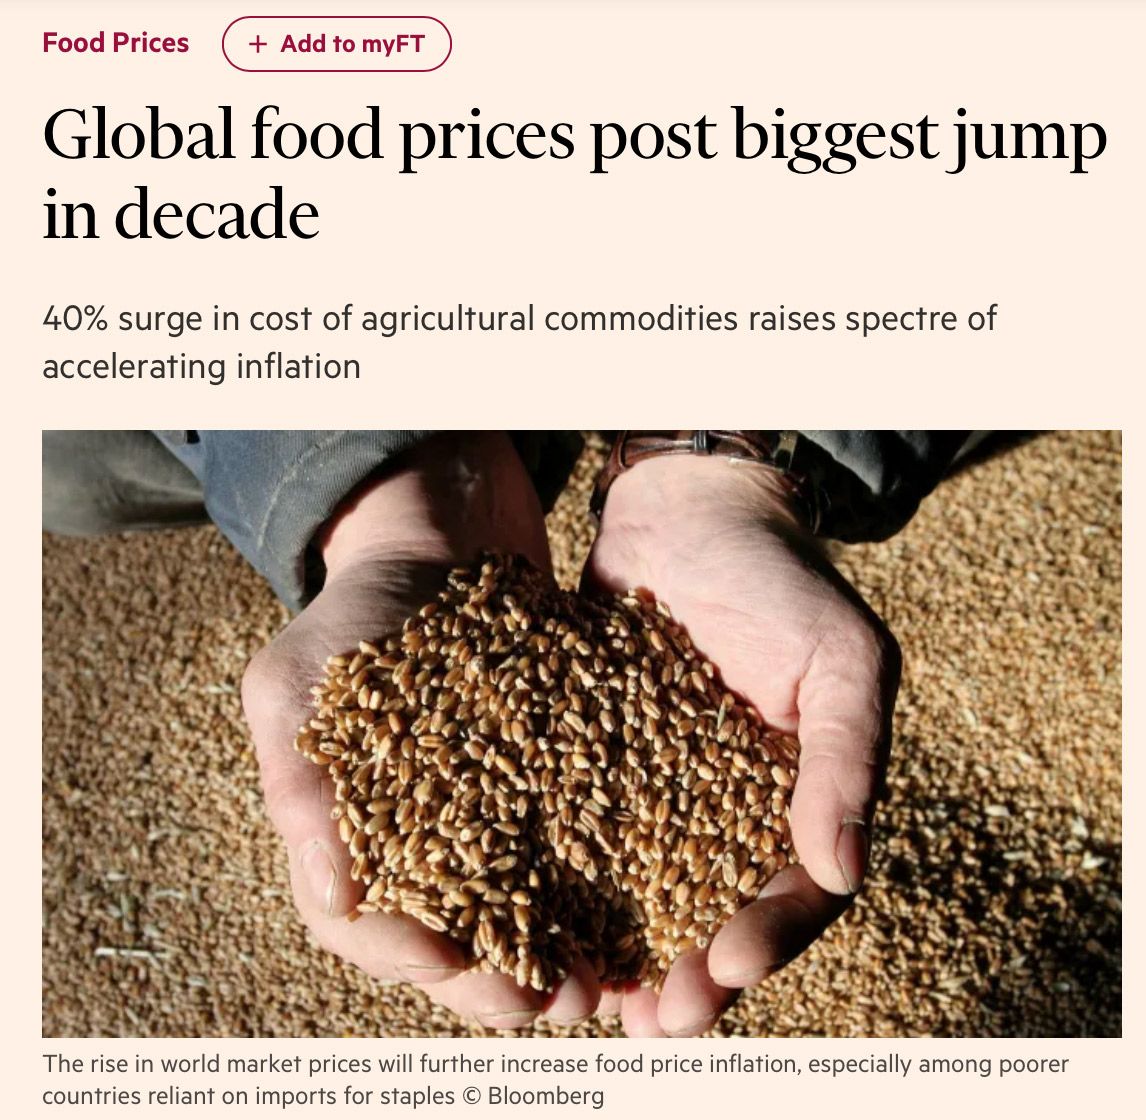 Global food prices post biggest jump in decade